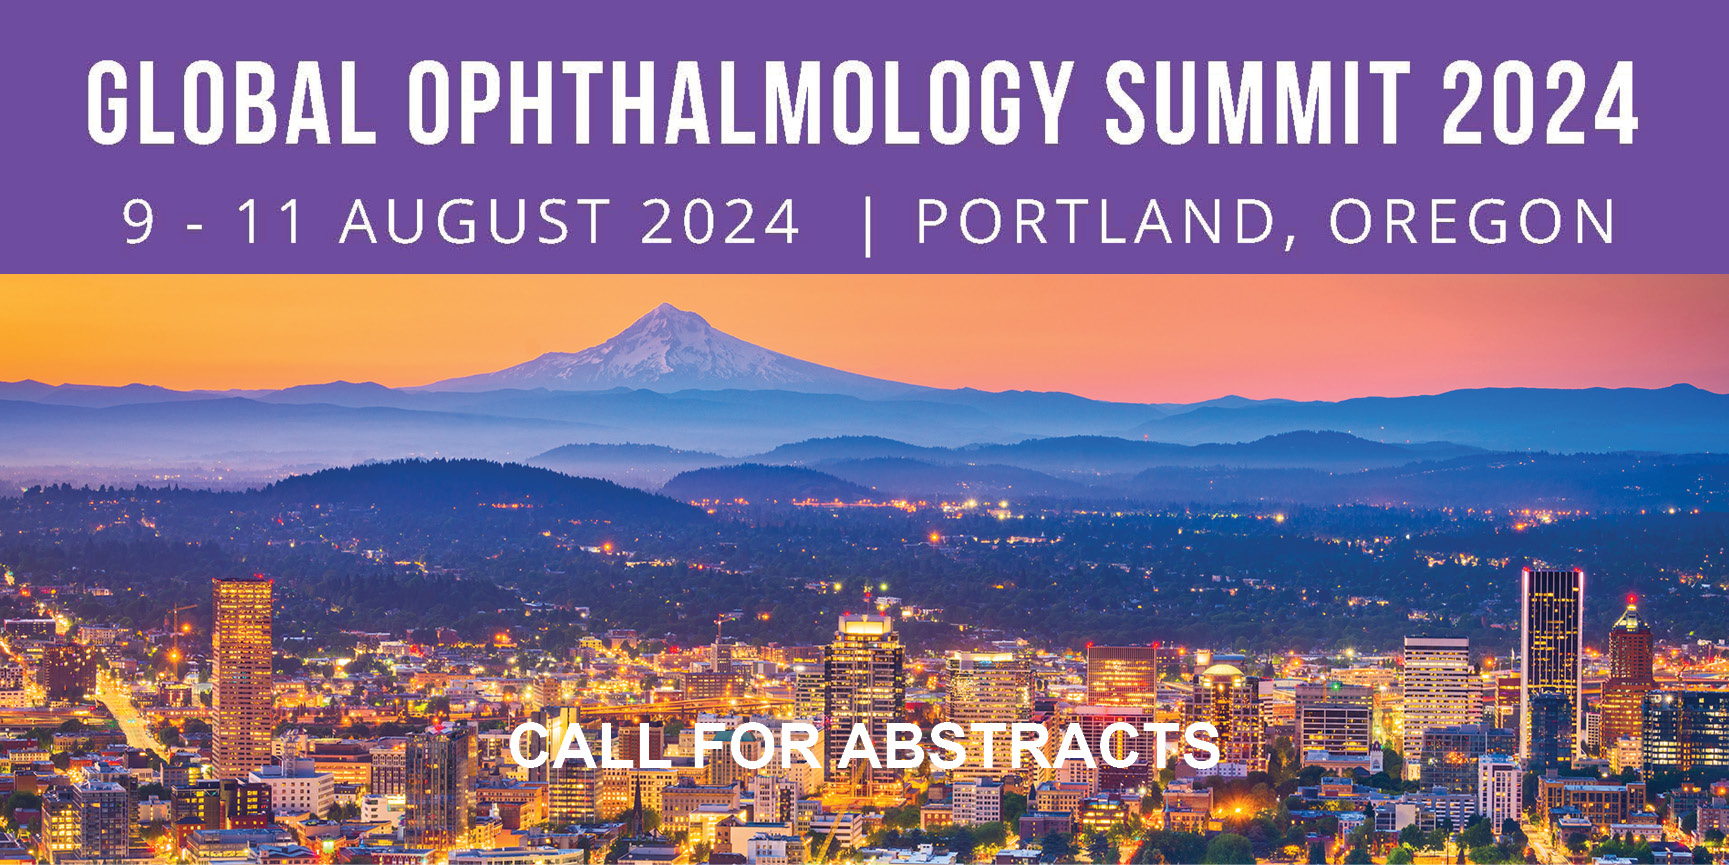 AAO on X: The #GlobalOphthalmology Summit is back for its 3rd consecutive  year! Hurry and get your #abstracts in before the early acceptance deadline  a month from today: 3/1/24. Learn more about